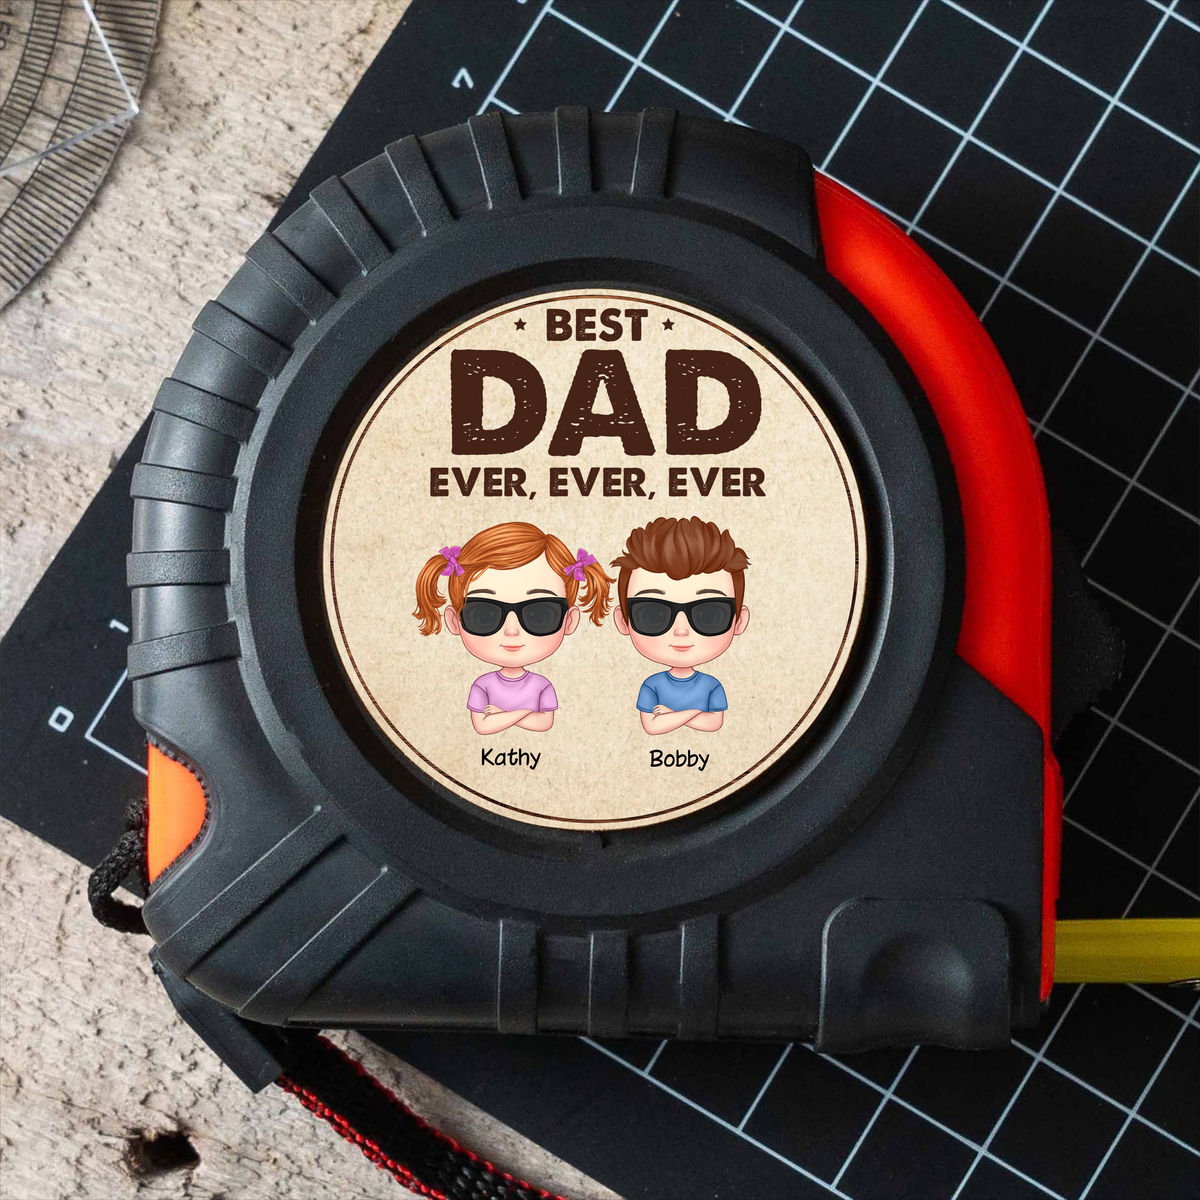 Personalized Tape Measure - Best Dad ever. ever. ever